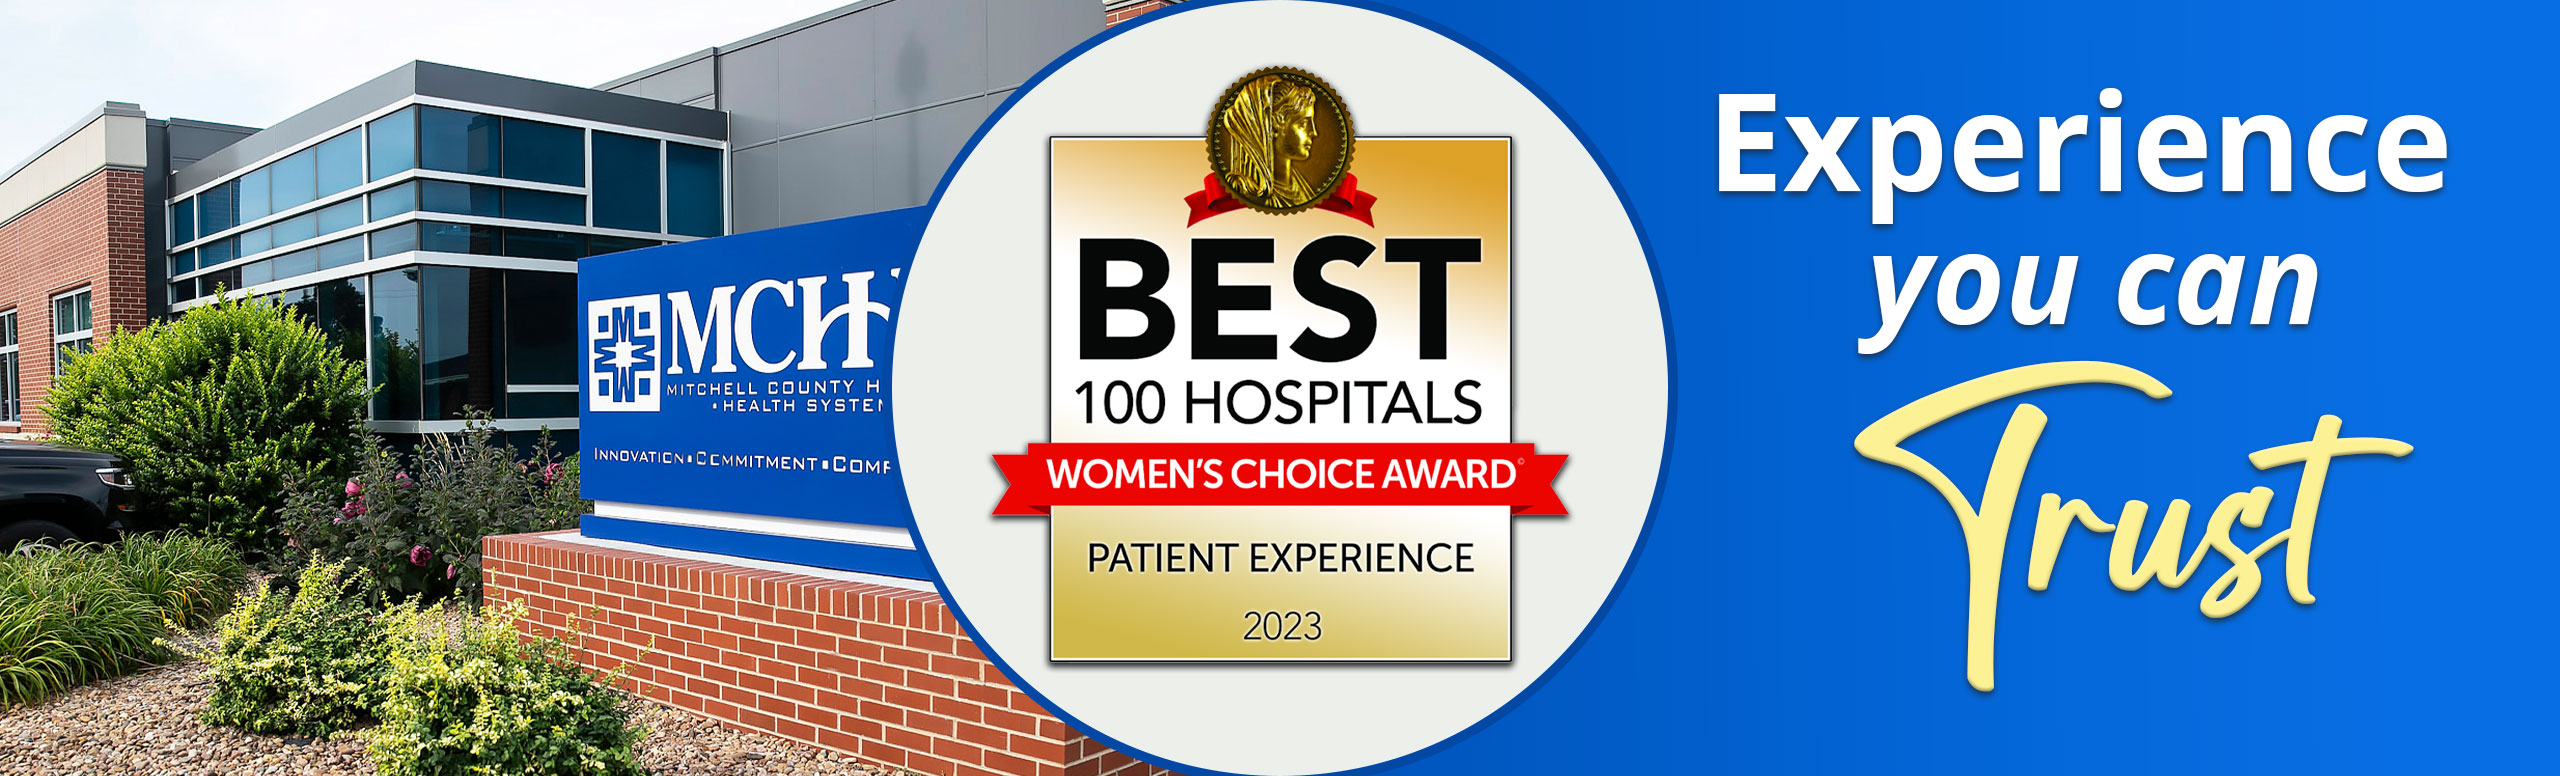 Experience you can trust

Best 100 Hospitals womens choice award

Patient Experience 2023